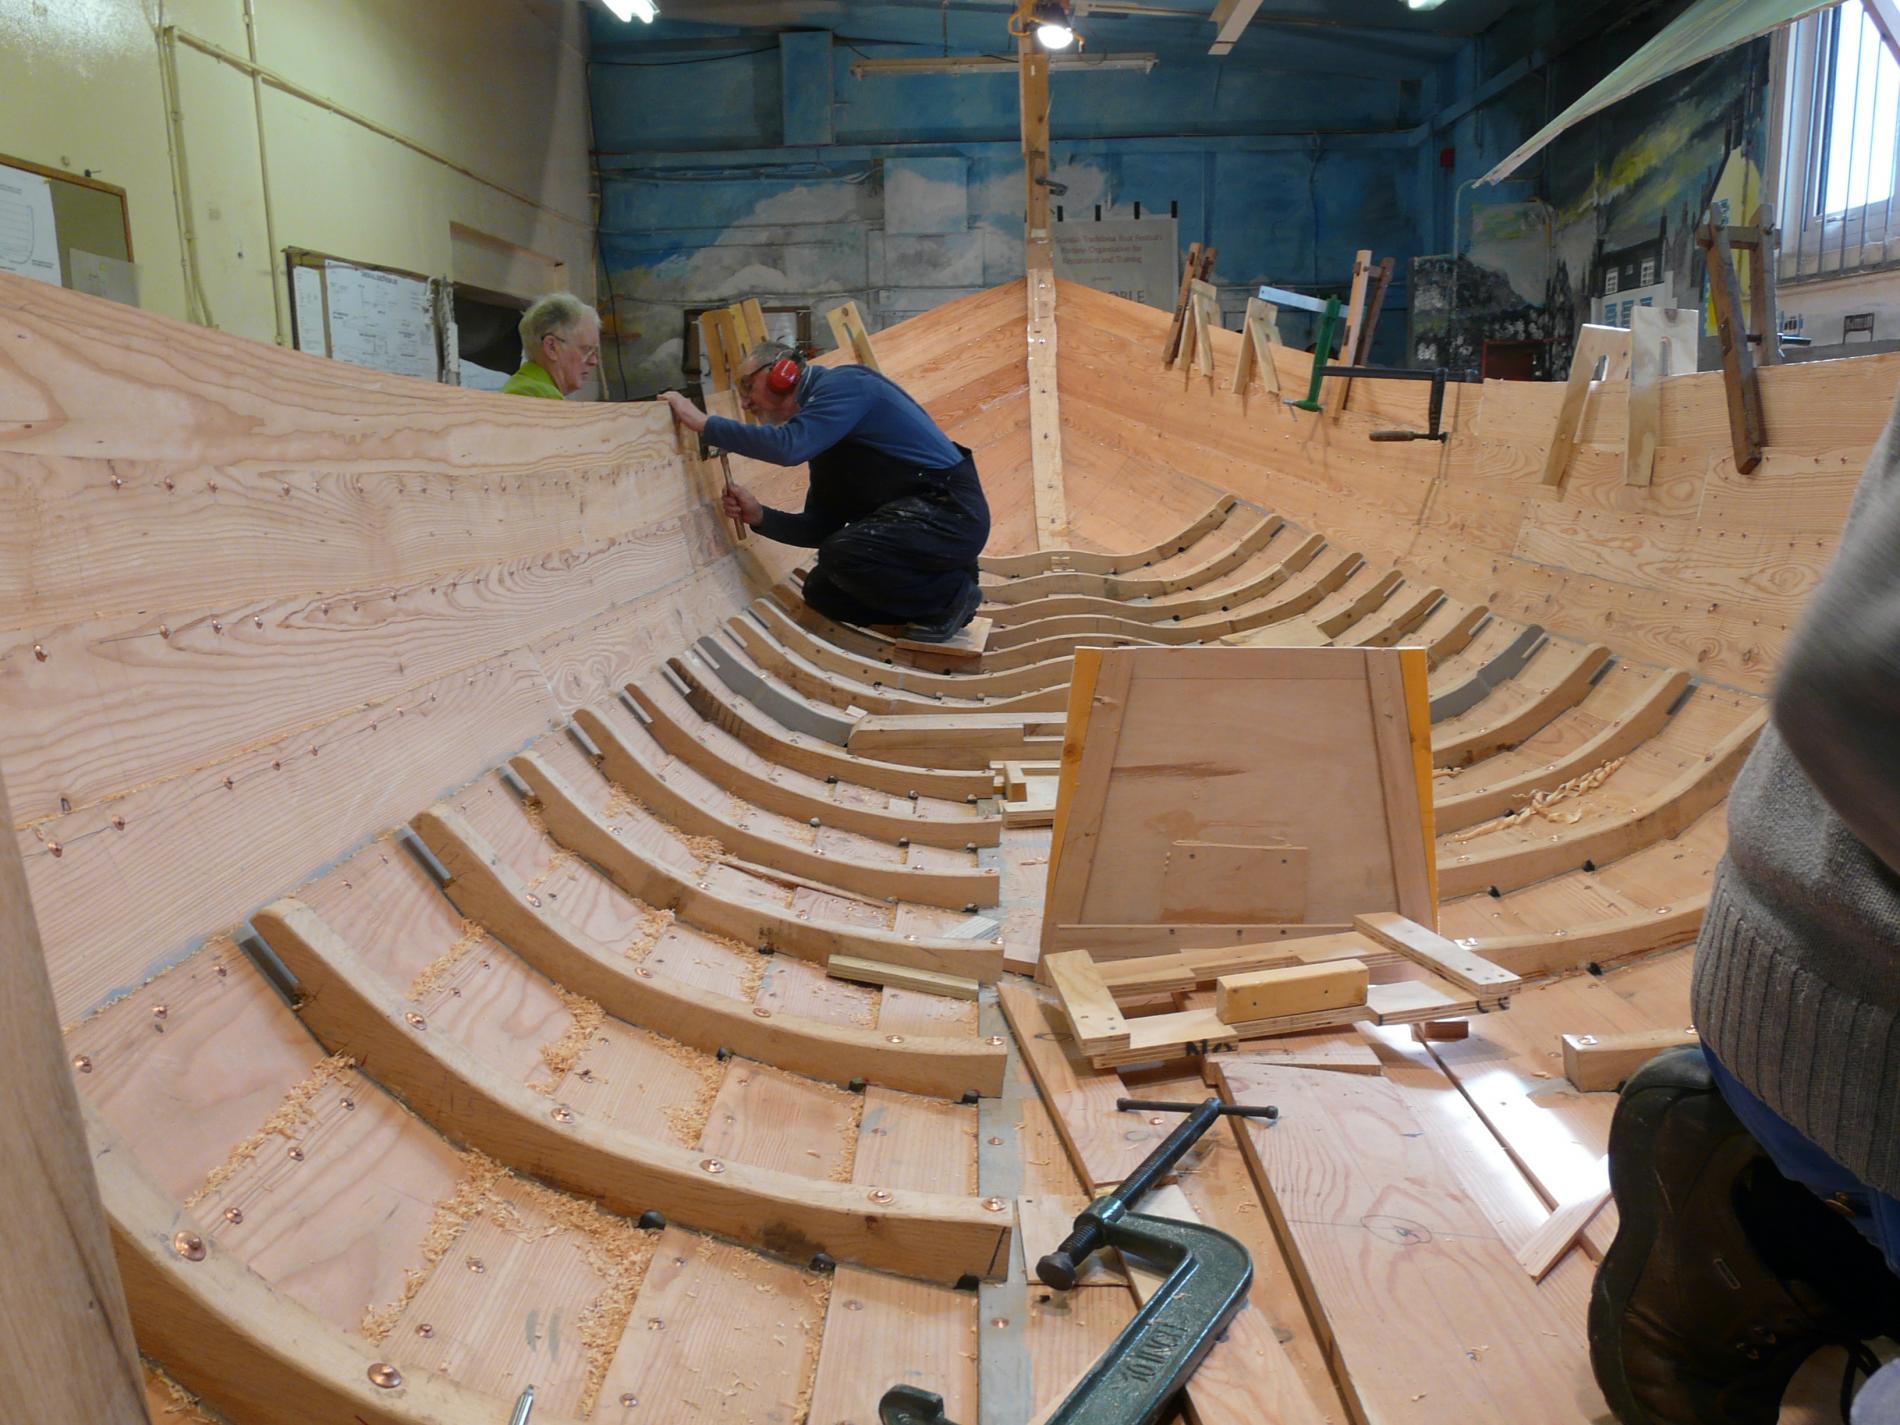 Learn About Traditional Boat Building at The Boatshed, Portsoy